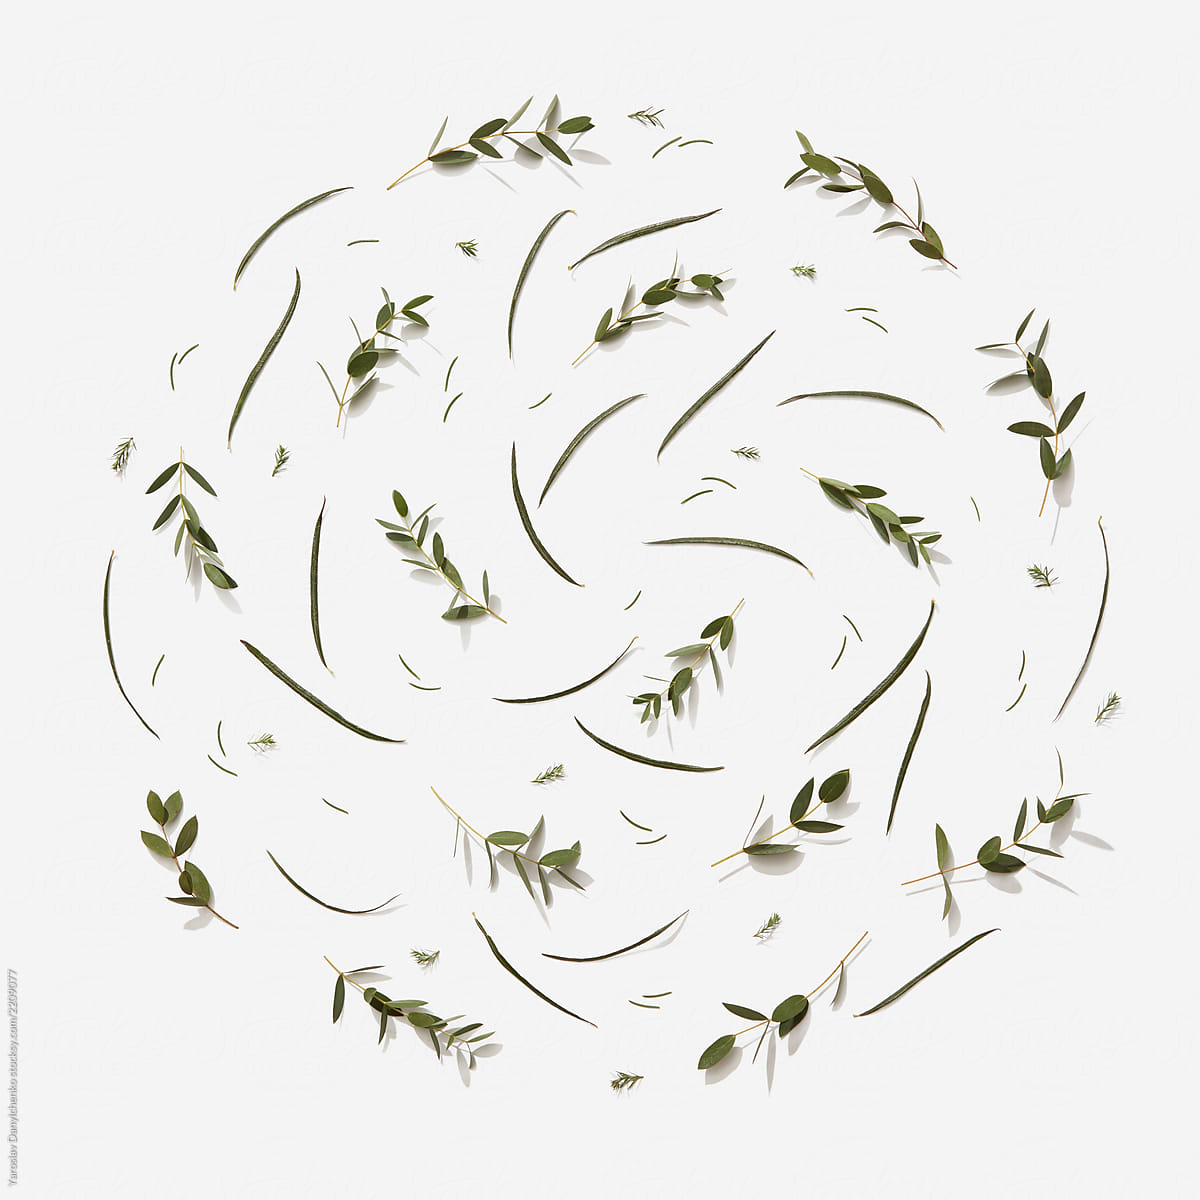 Pattern of green leaves in the shape of a circle